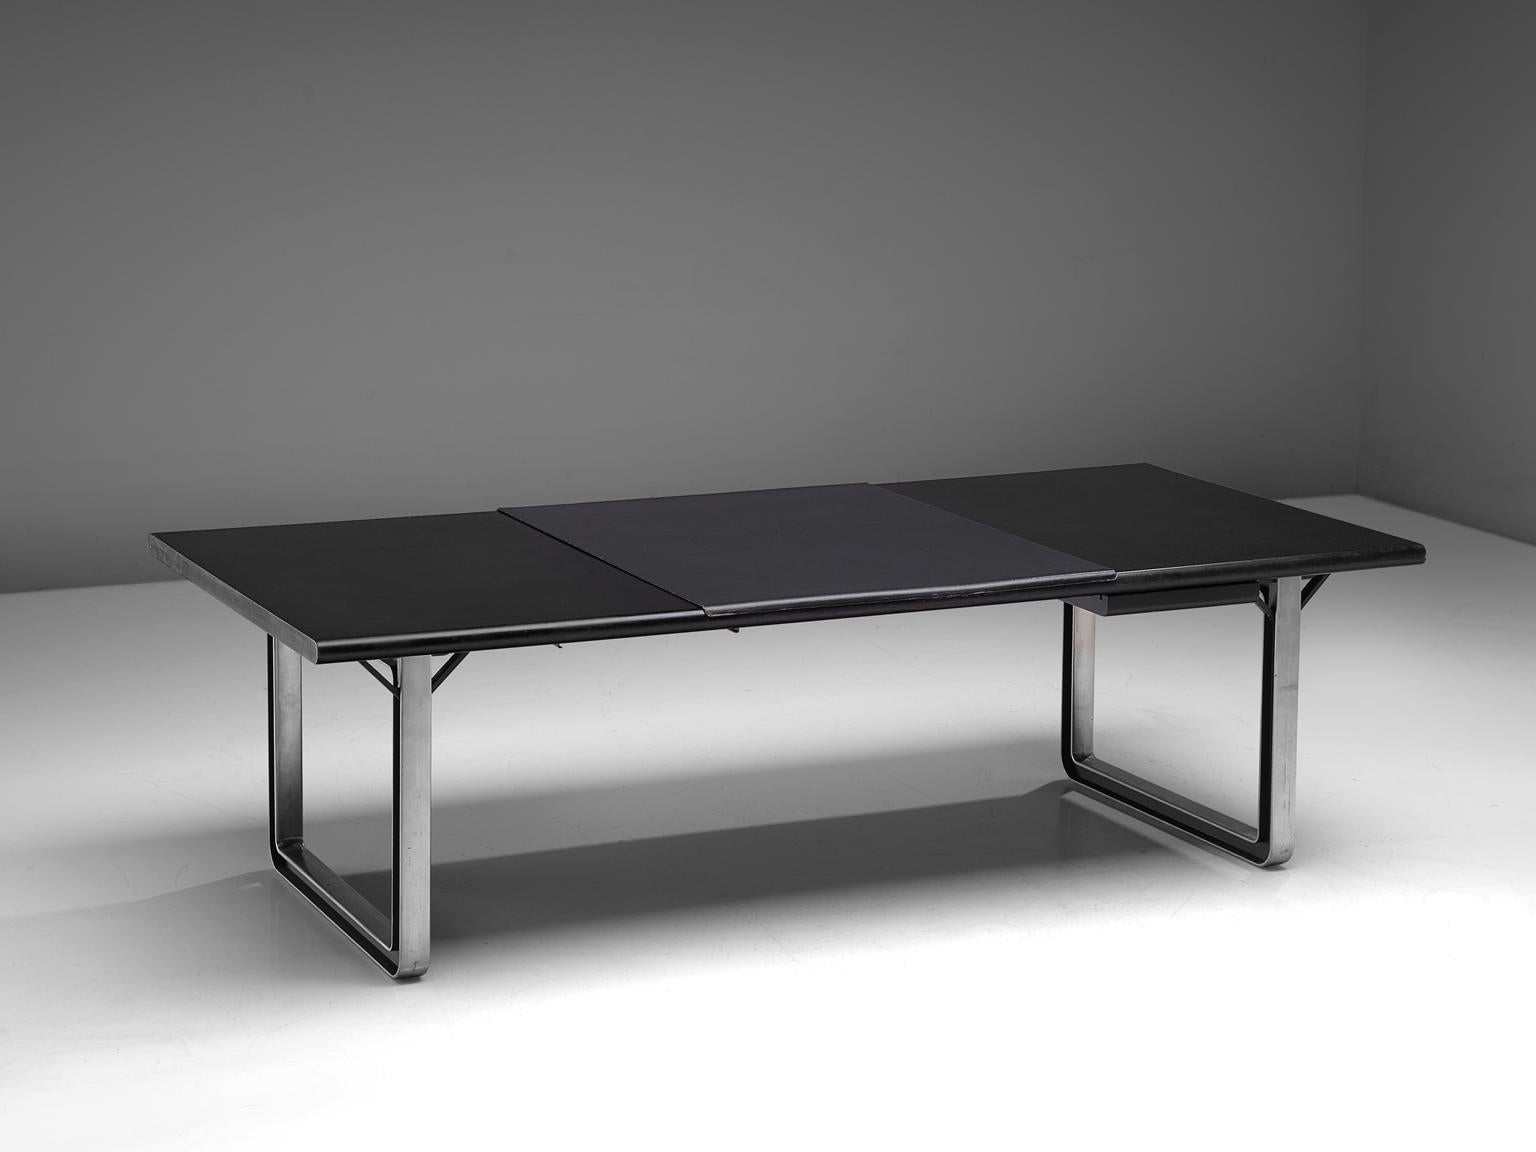 Osvaldo Borsani for Tecno, desk/writing table, aluminum, lacquered wood and leather, Italy, 1970s.

Desk table with a black top. The base consists of a two metal frames. The base creates an open character with the dark top. It was at the time that